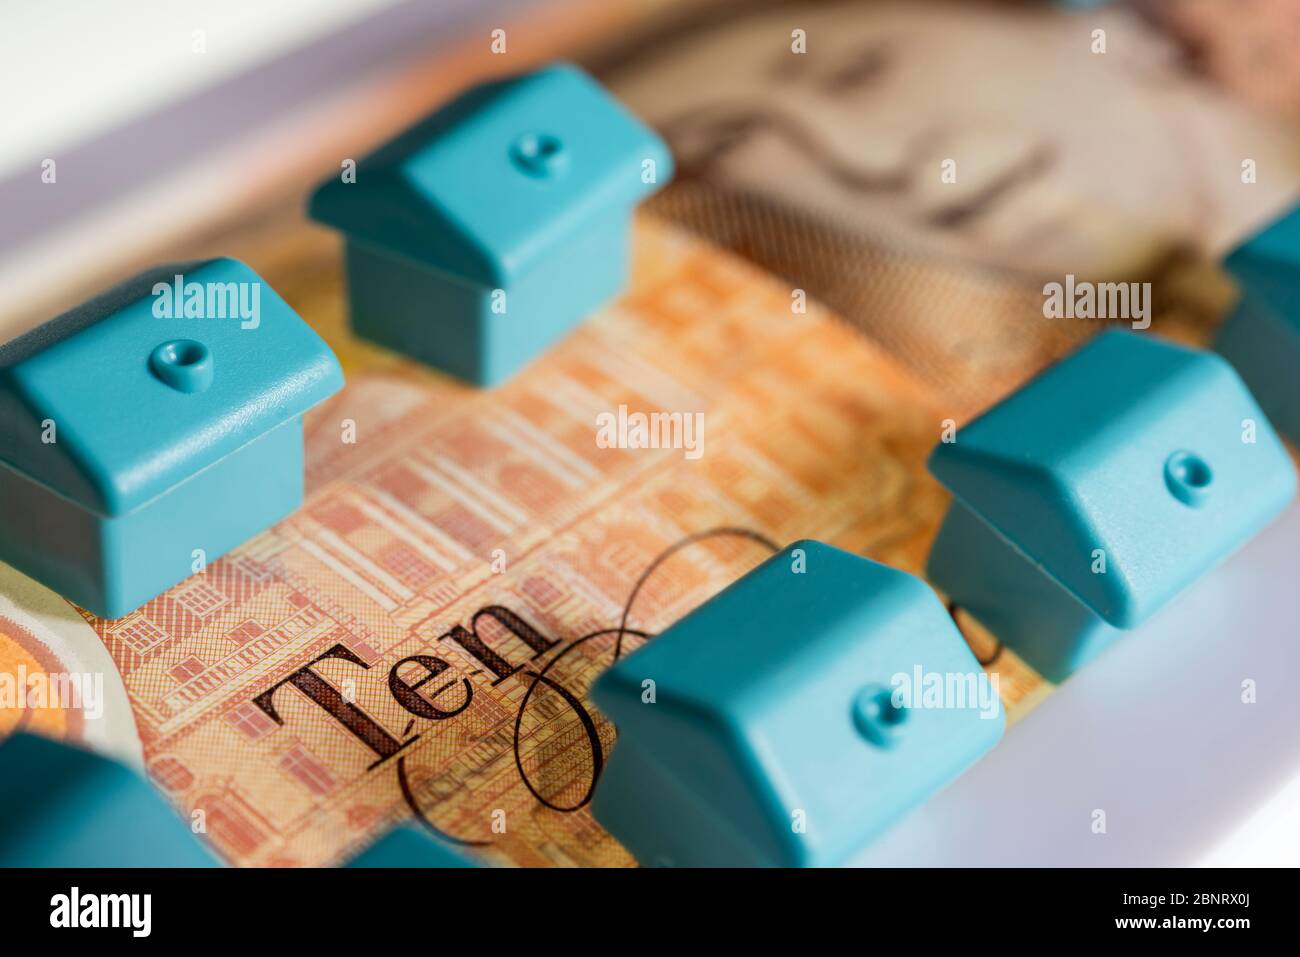 Ten pound note with small blue houses,investment concept Stock Photo